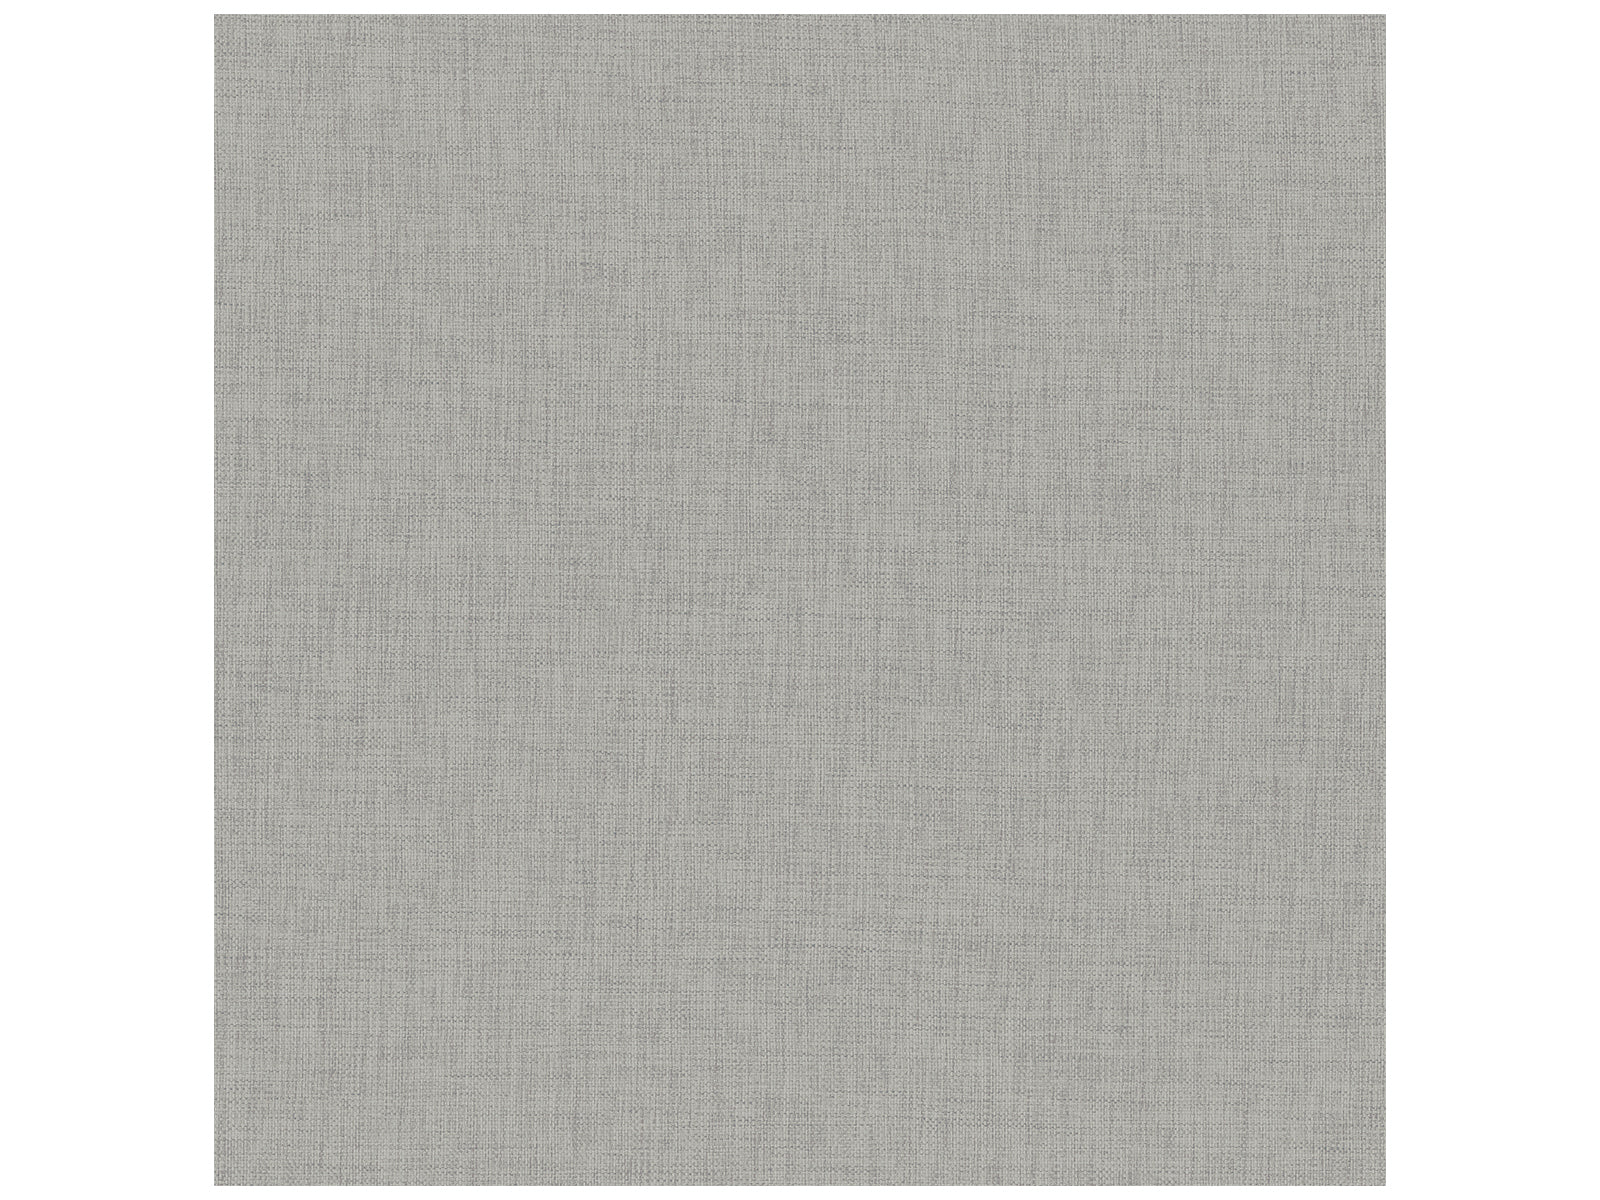 24 X 24 In Crossweave Shade Matte Rectified Color Body Porcelain